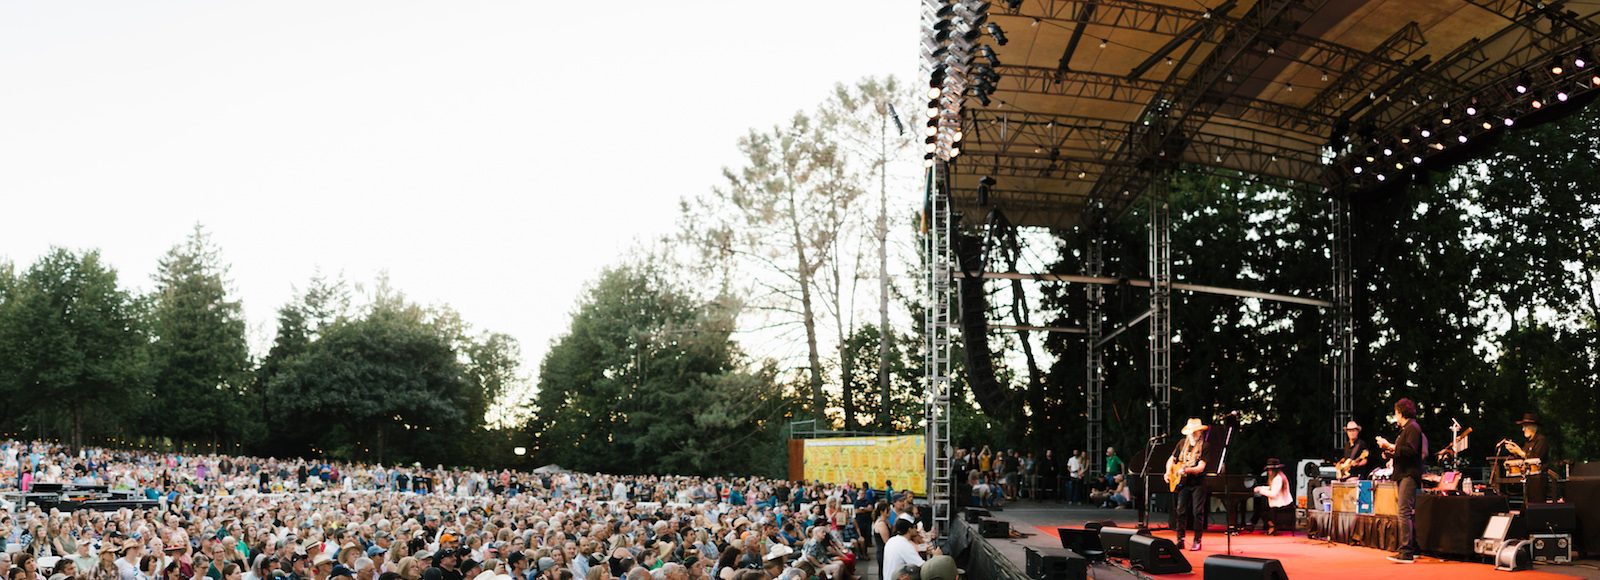 Willie Nelson performs in front of a sold-out crowd in Troutdale, Oregon. Photo by Joe Tobiason.